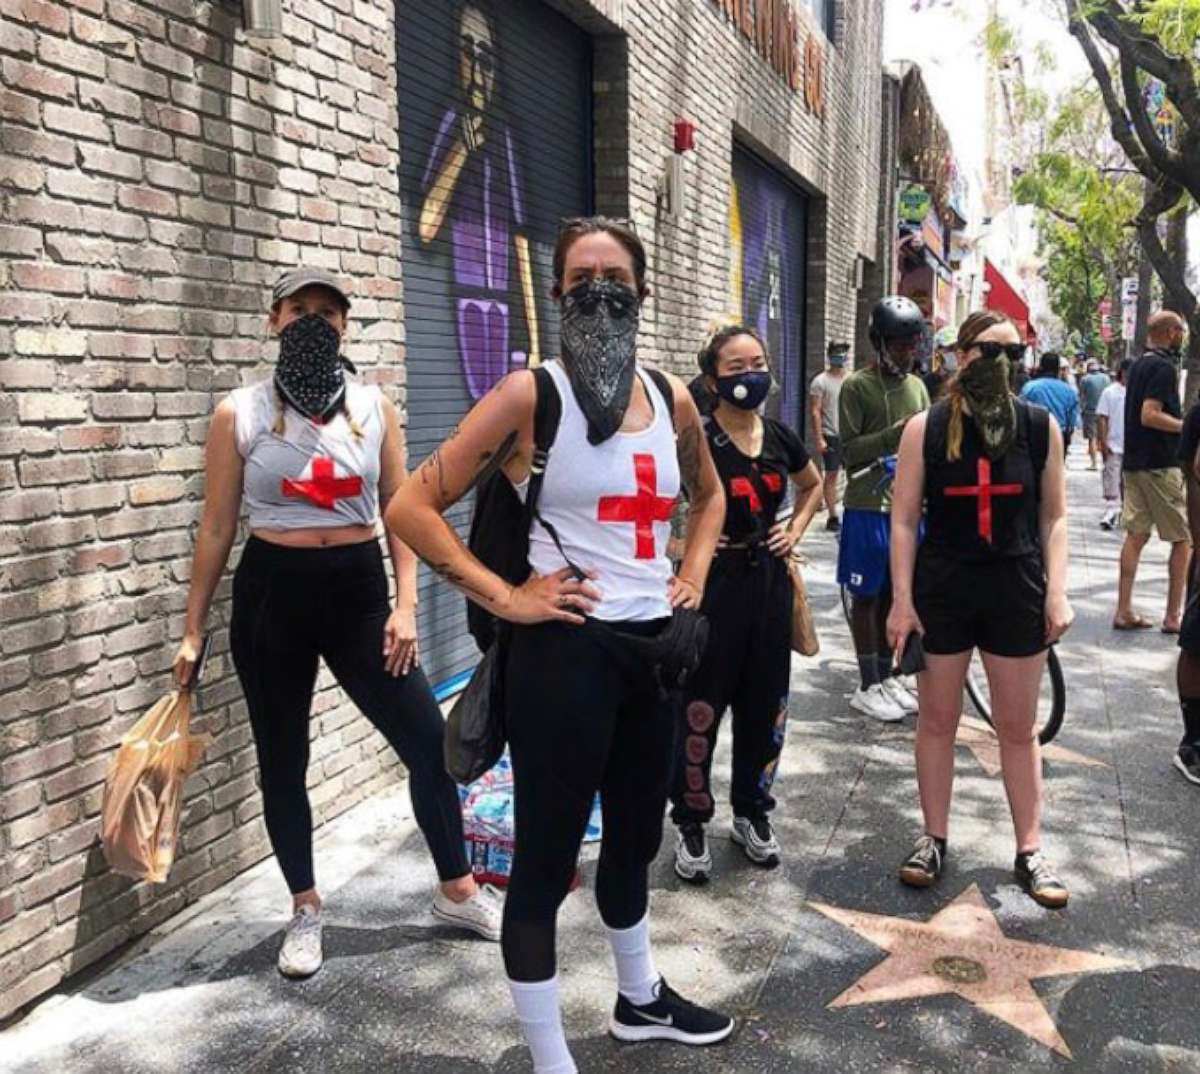 PHOTO: Volunteers from the group "Feed the Streets LA" serve protesters with matching cross t-shirts and provide medical aid to those hurt while marching in Los Angeles, California in wake of George Floyd's death.